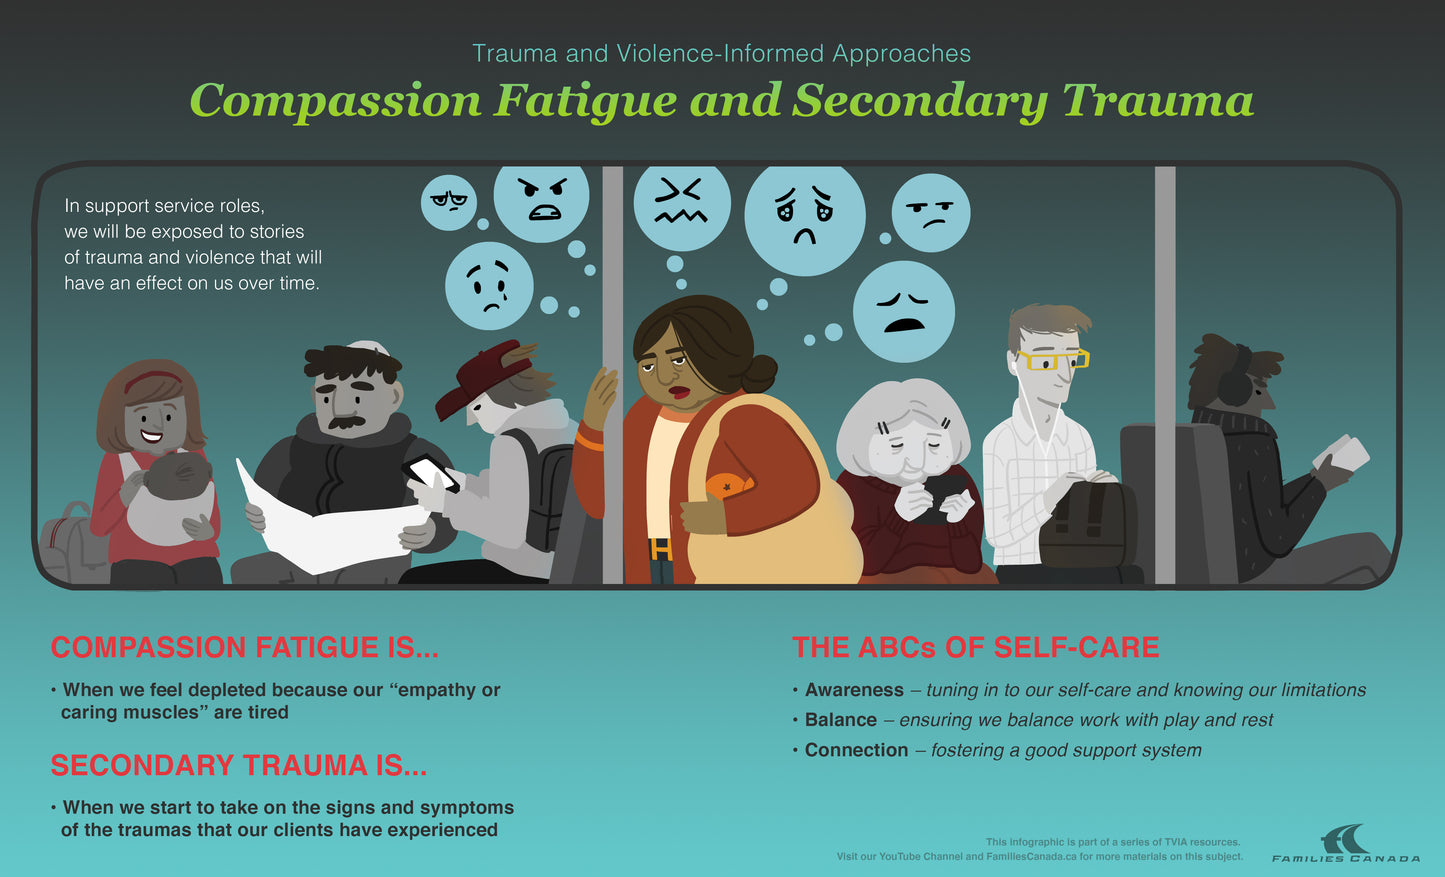 Trauma- and Violence-Informed Approaches Infographics